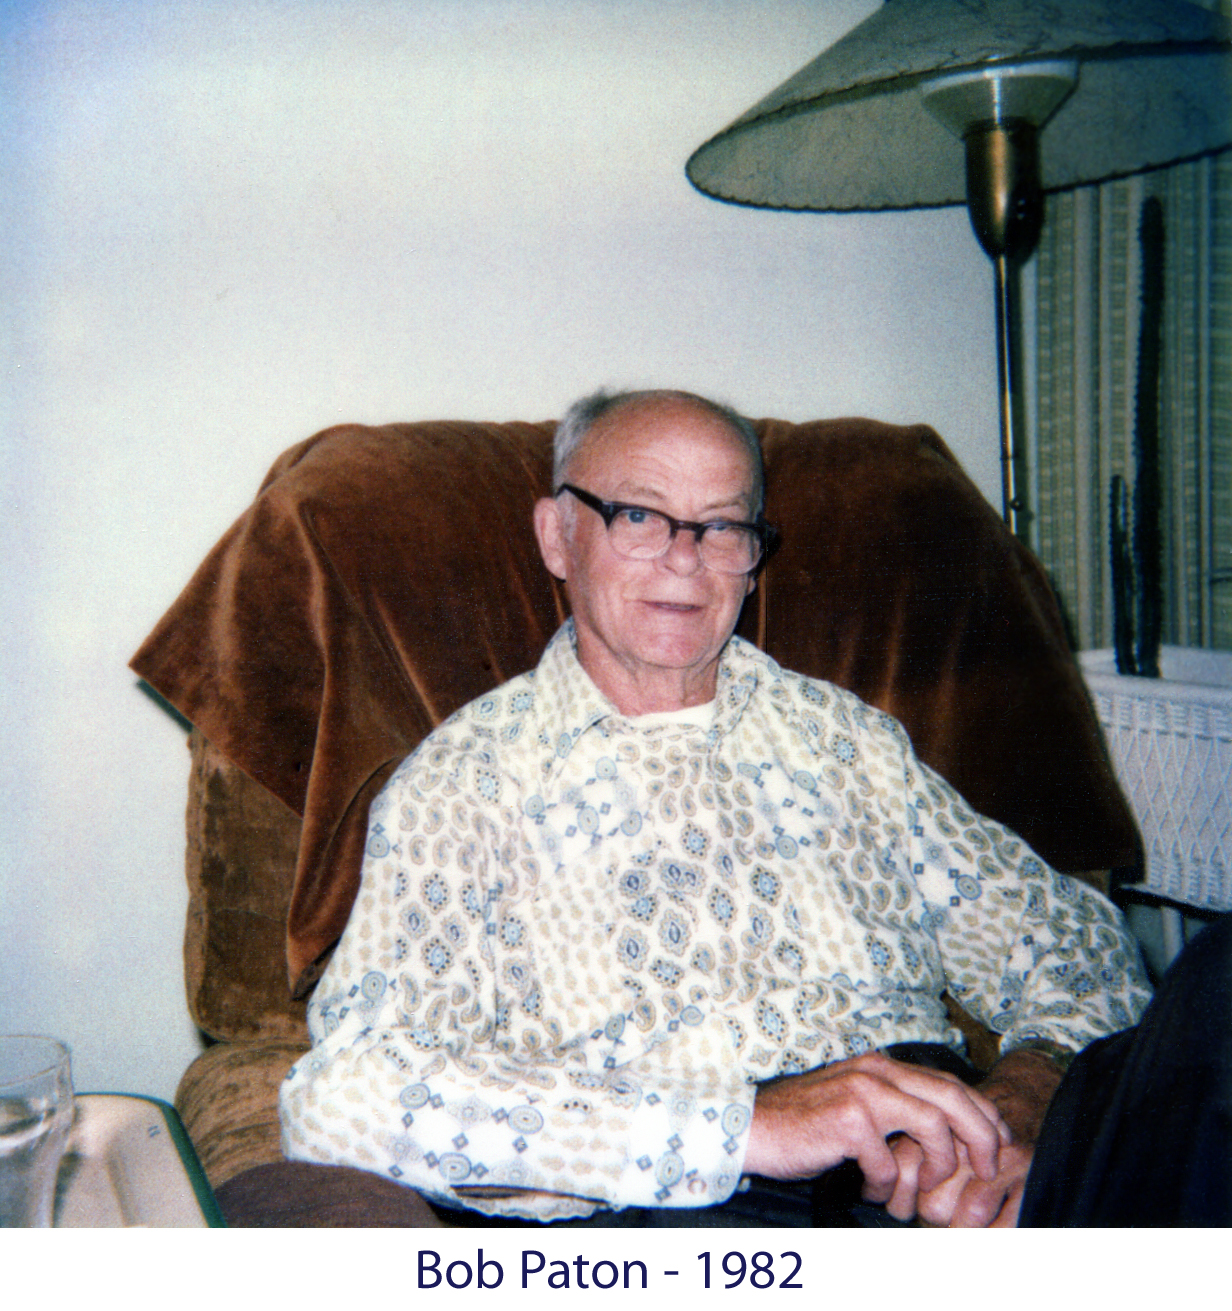 Bob Paton at home in his favorite chair in June 1982